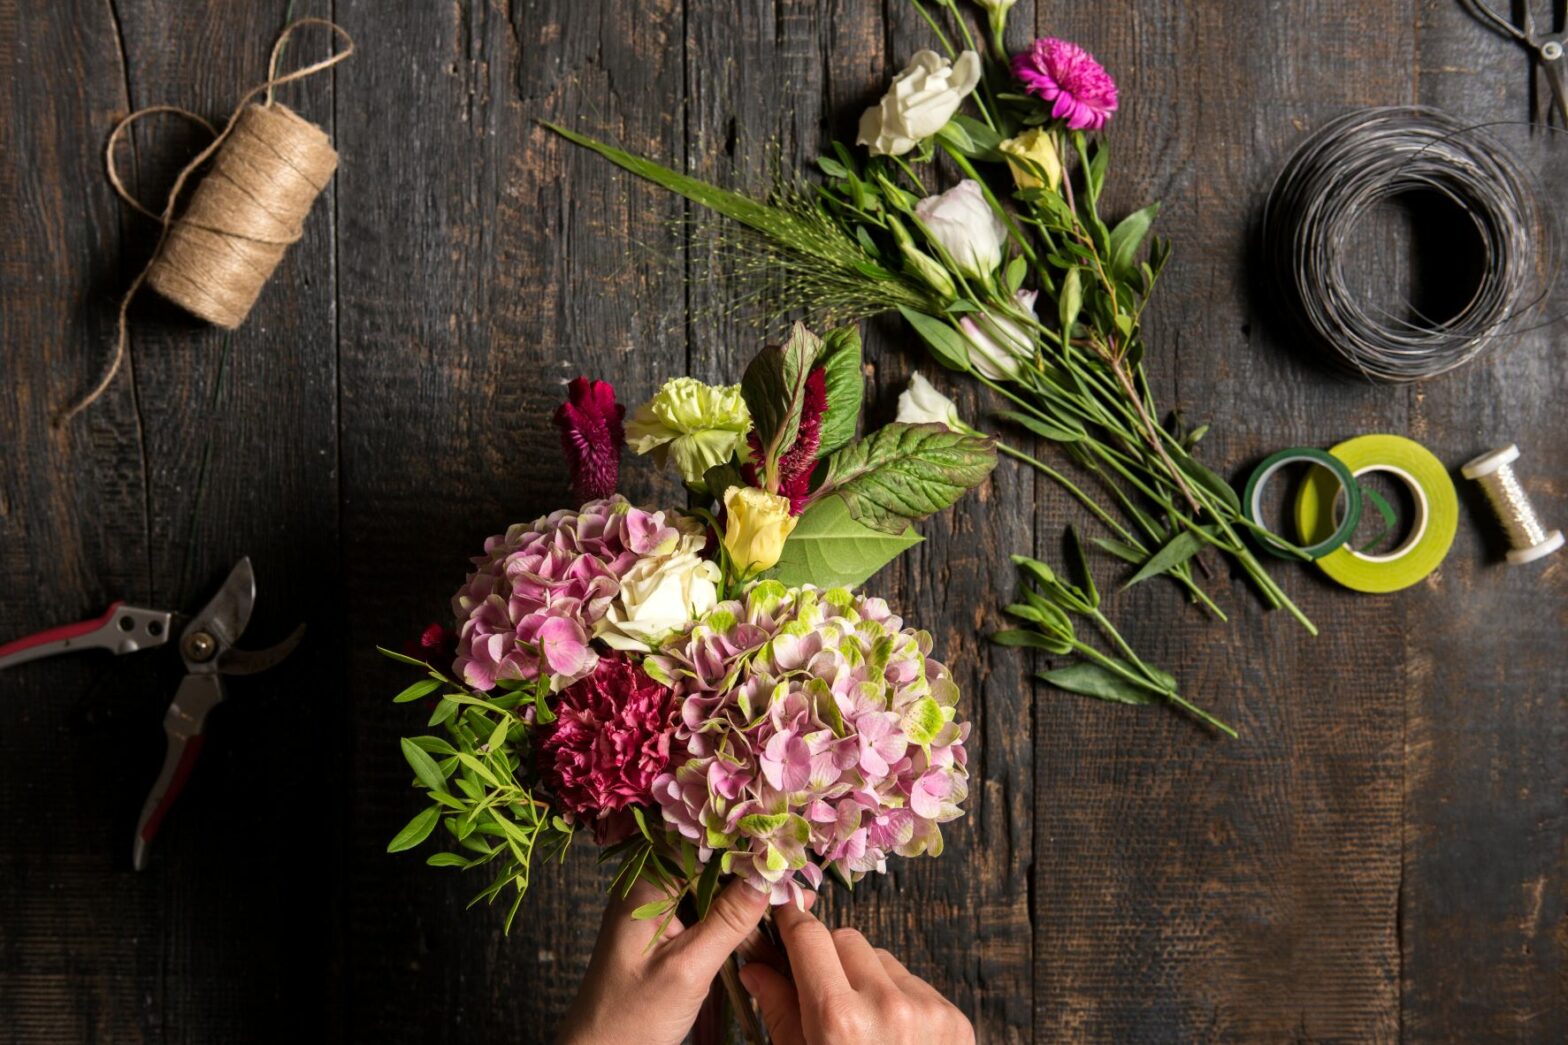 A Demonstration on the Art of Floral Arranging